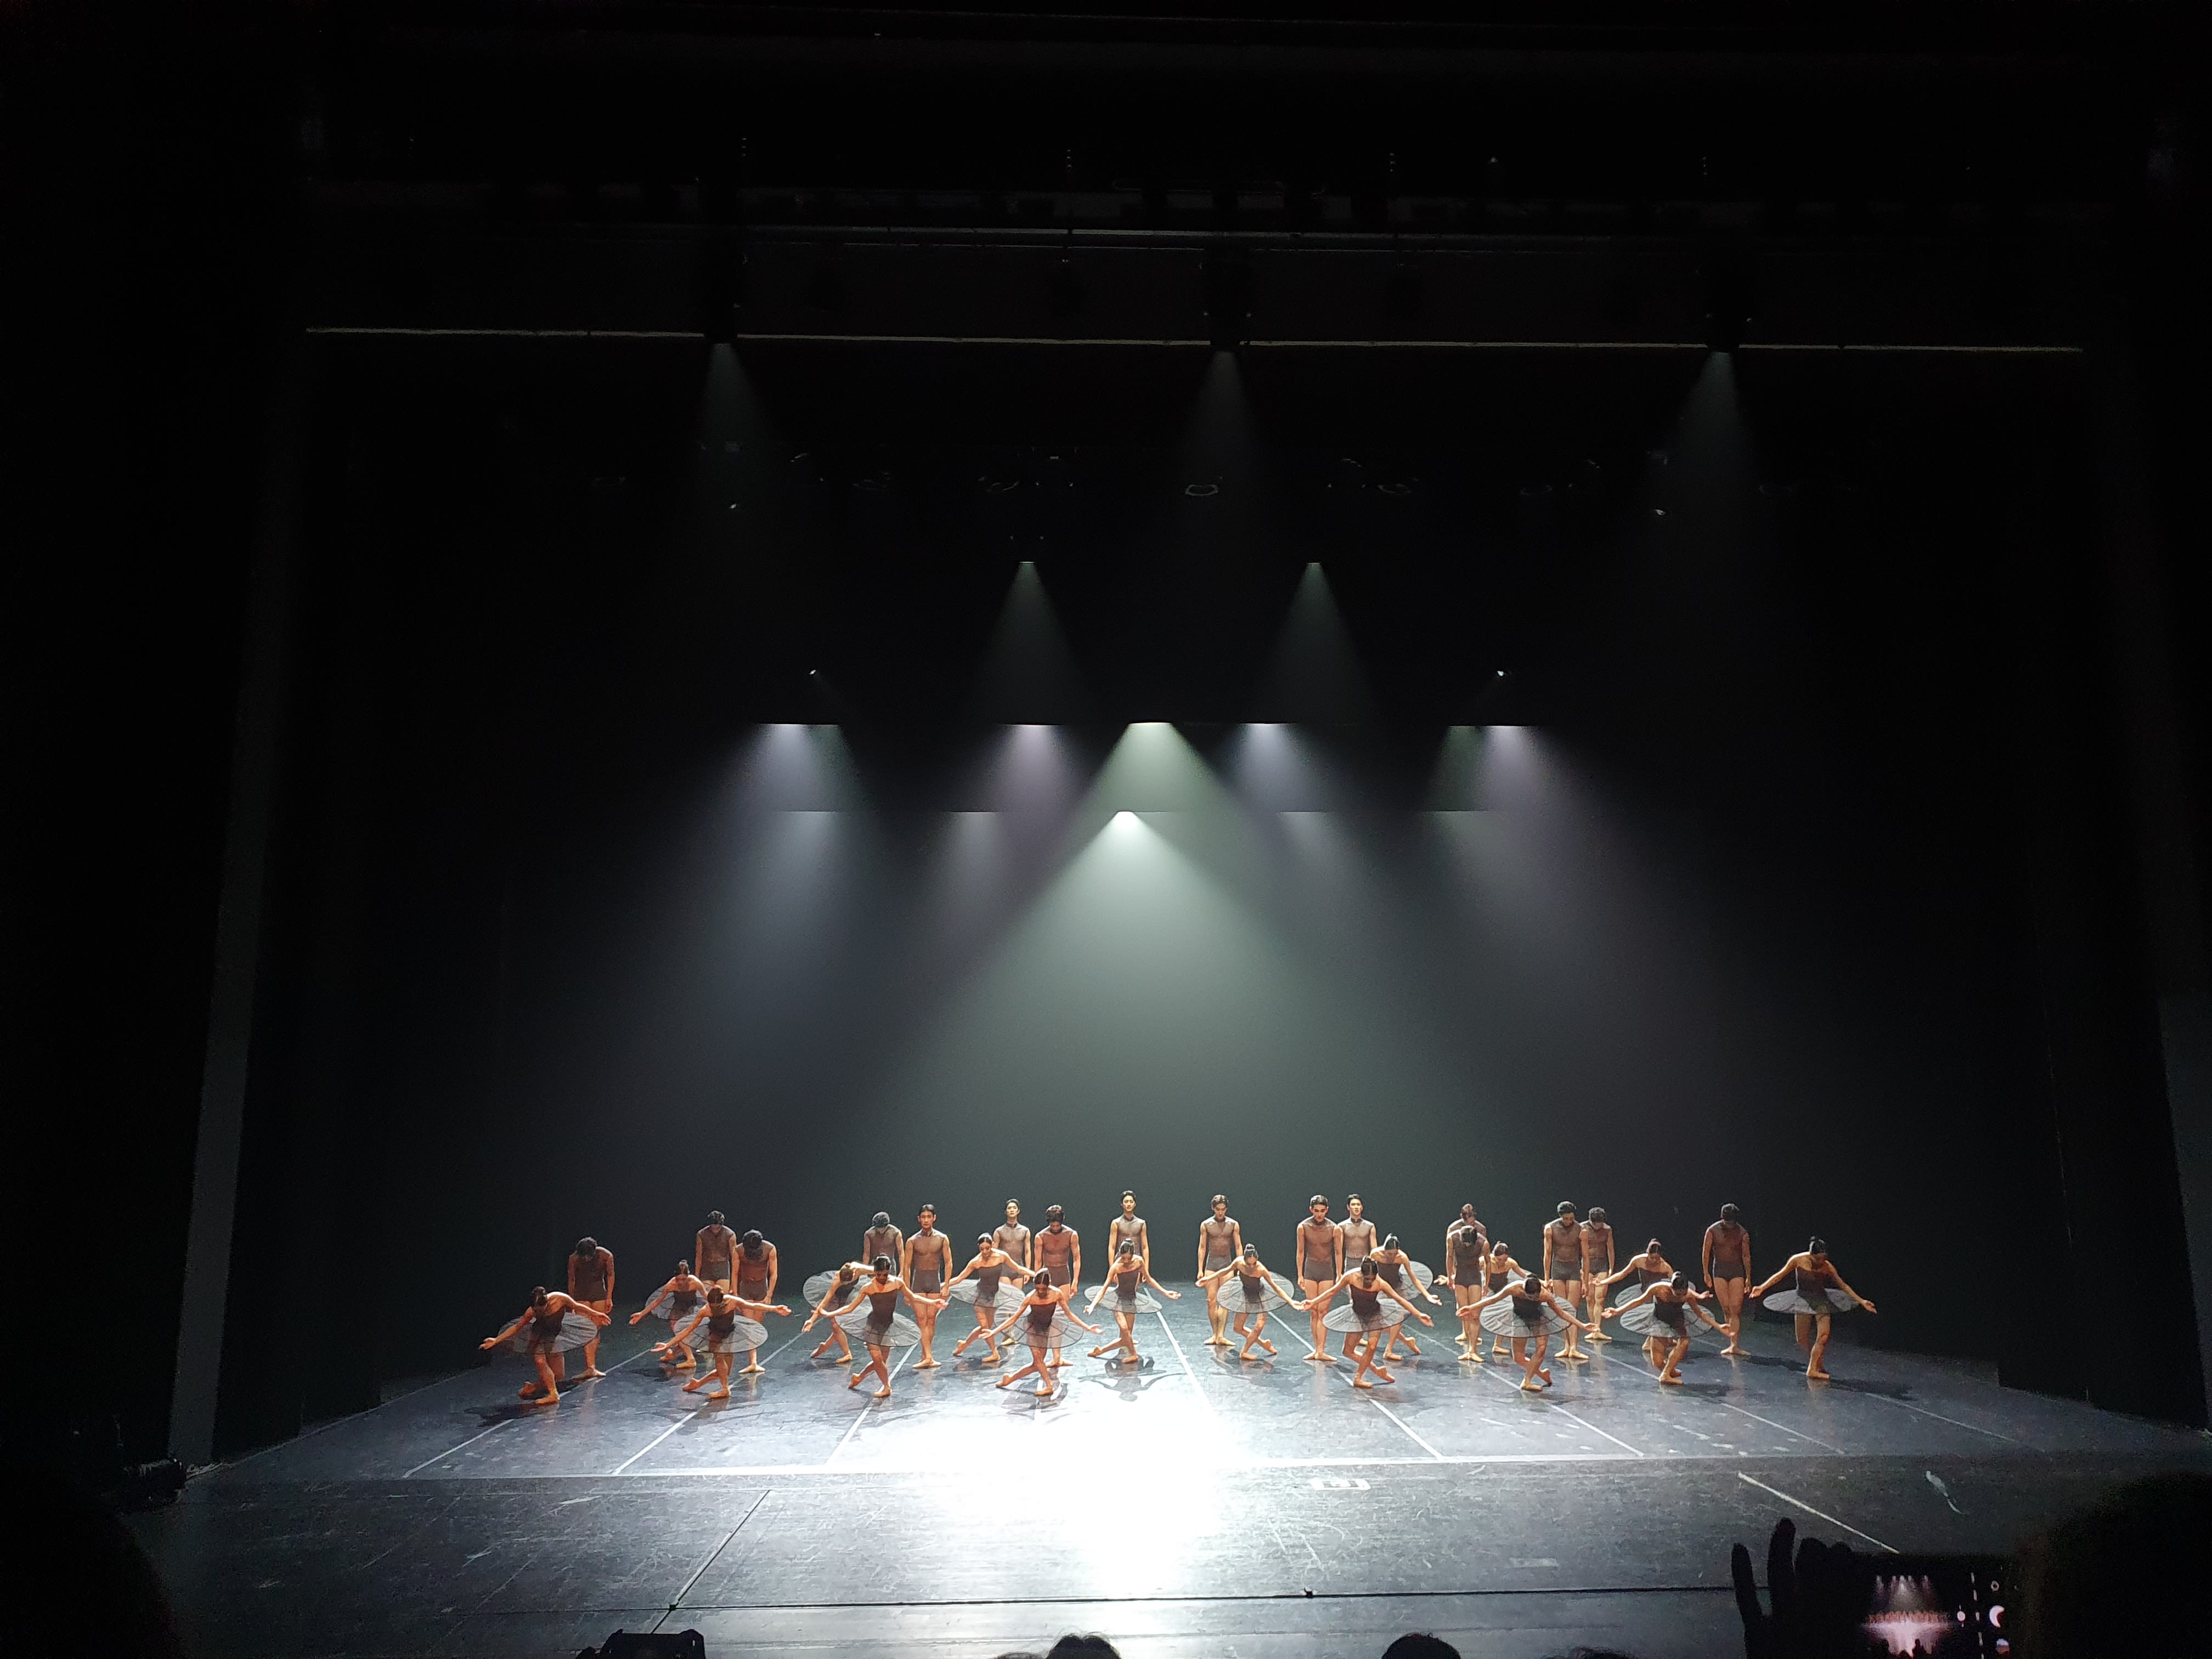 Image shows a black stage with white lighting illuminating dancers wearing tutus.